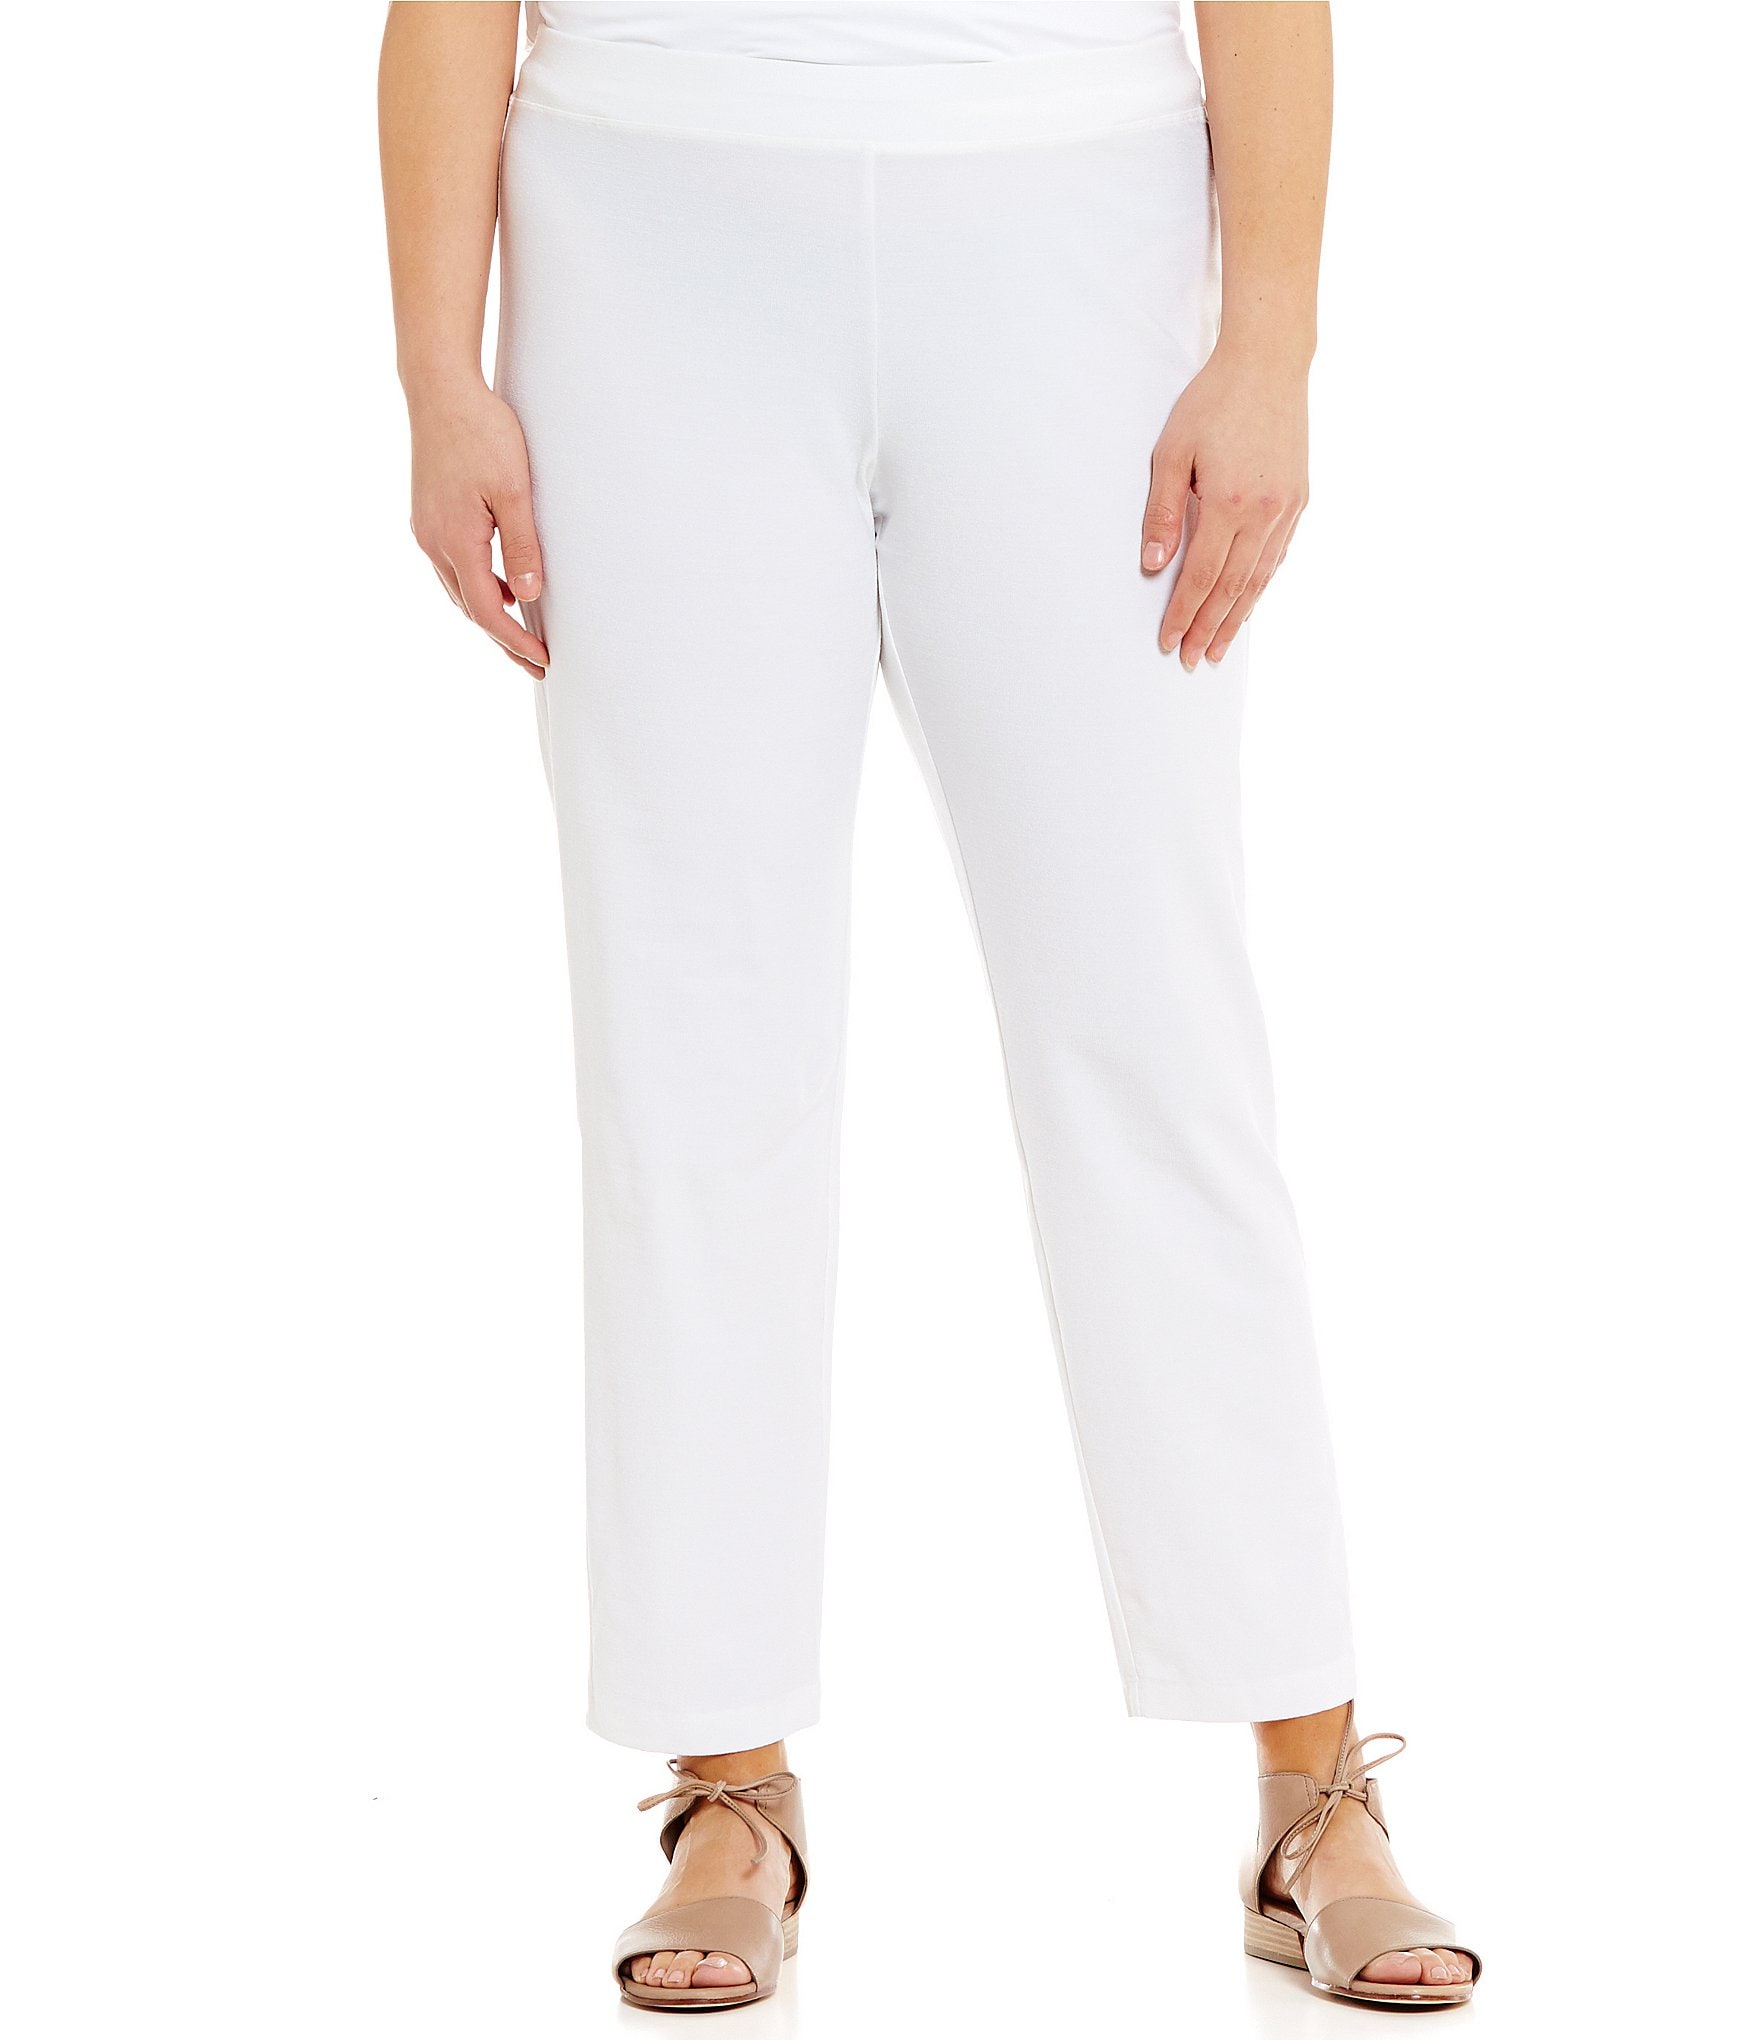 Aggregate more than 135 womens white ankle pants super hot - in.eteachers